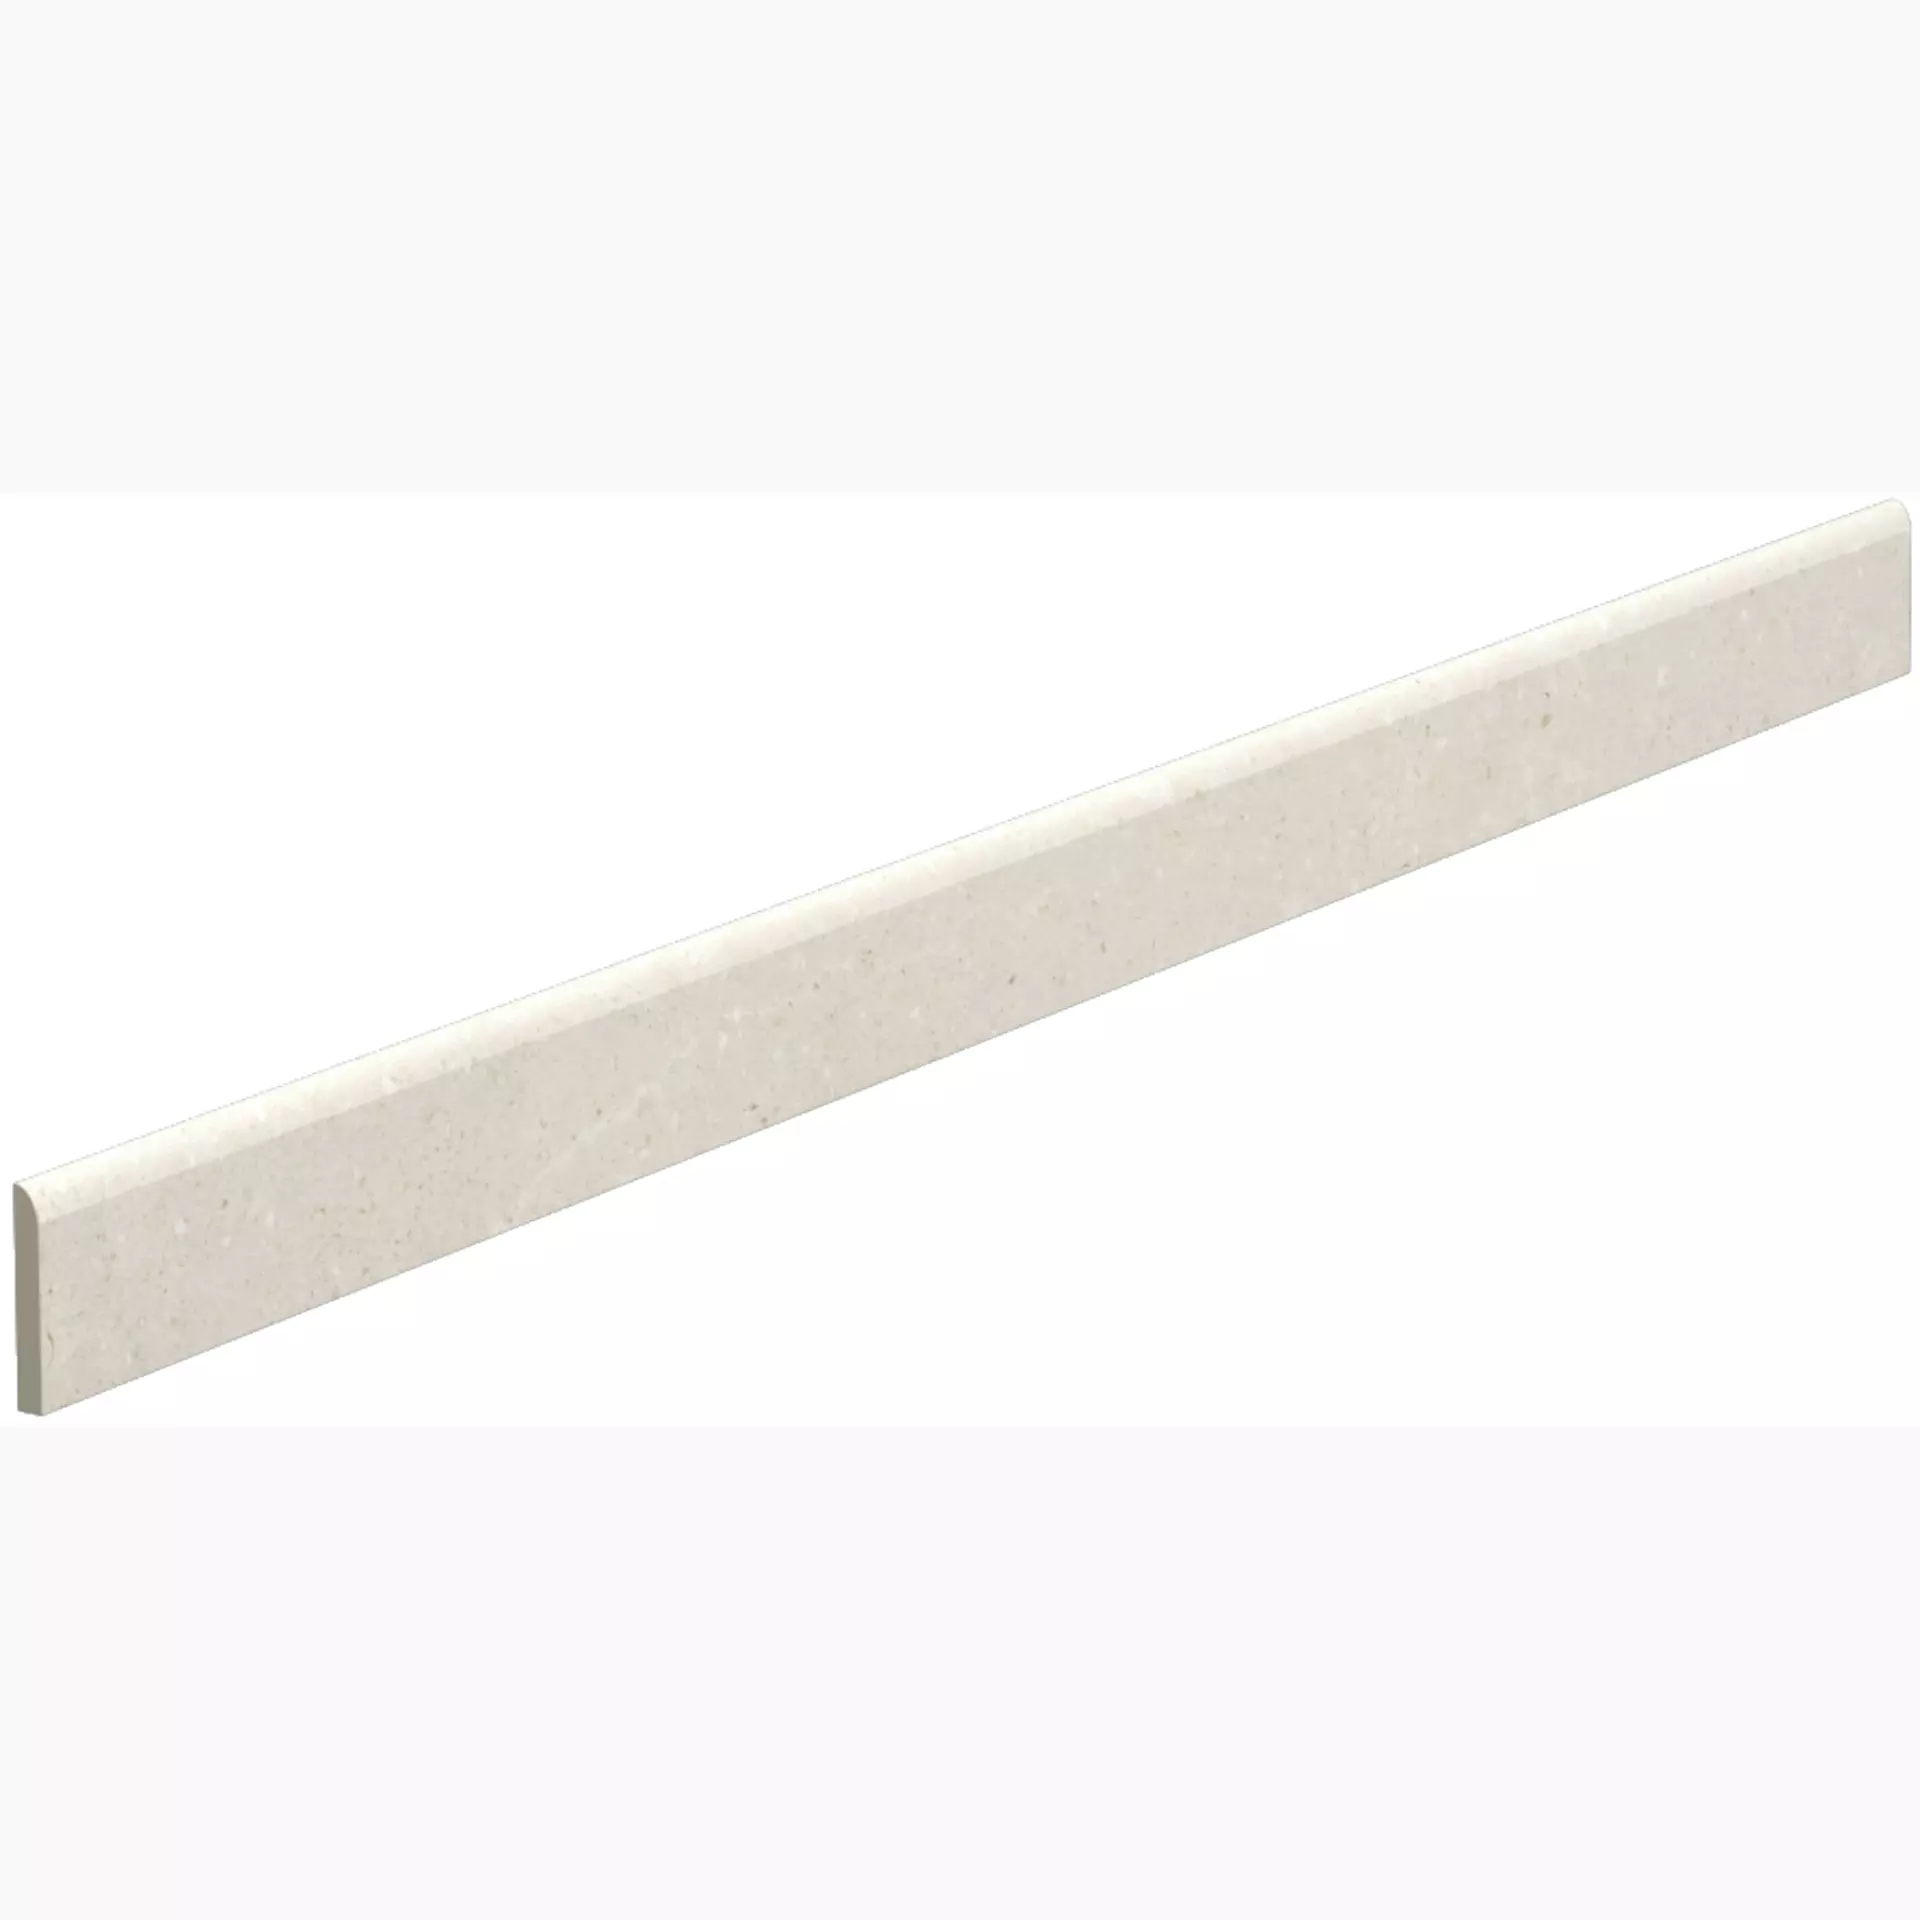 Del Conca Hwd Wild White Hwd10 Naturale Skirting board G0WD10R12 7x120cm rectified 8,5mm